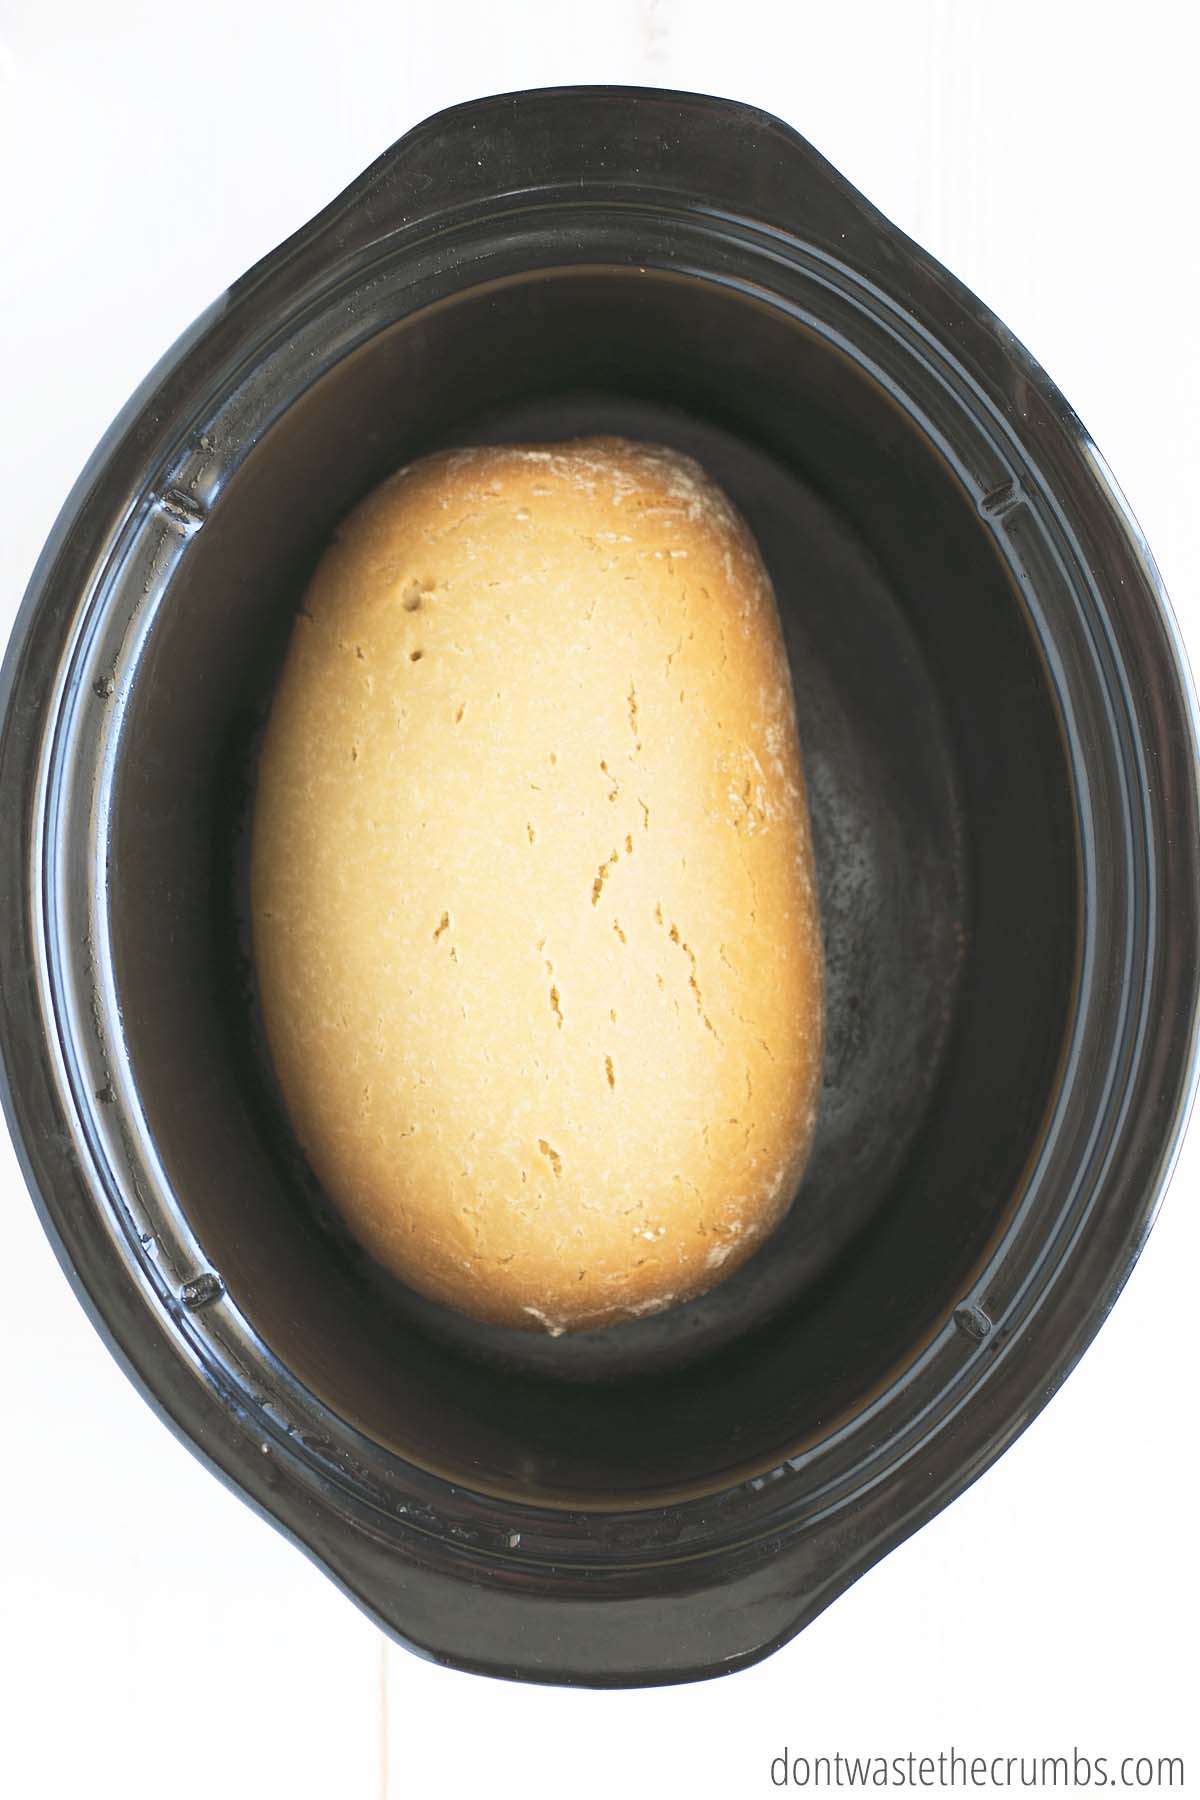 Baked loaf of bread in a slow cooker.